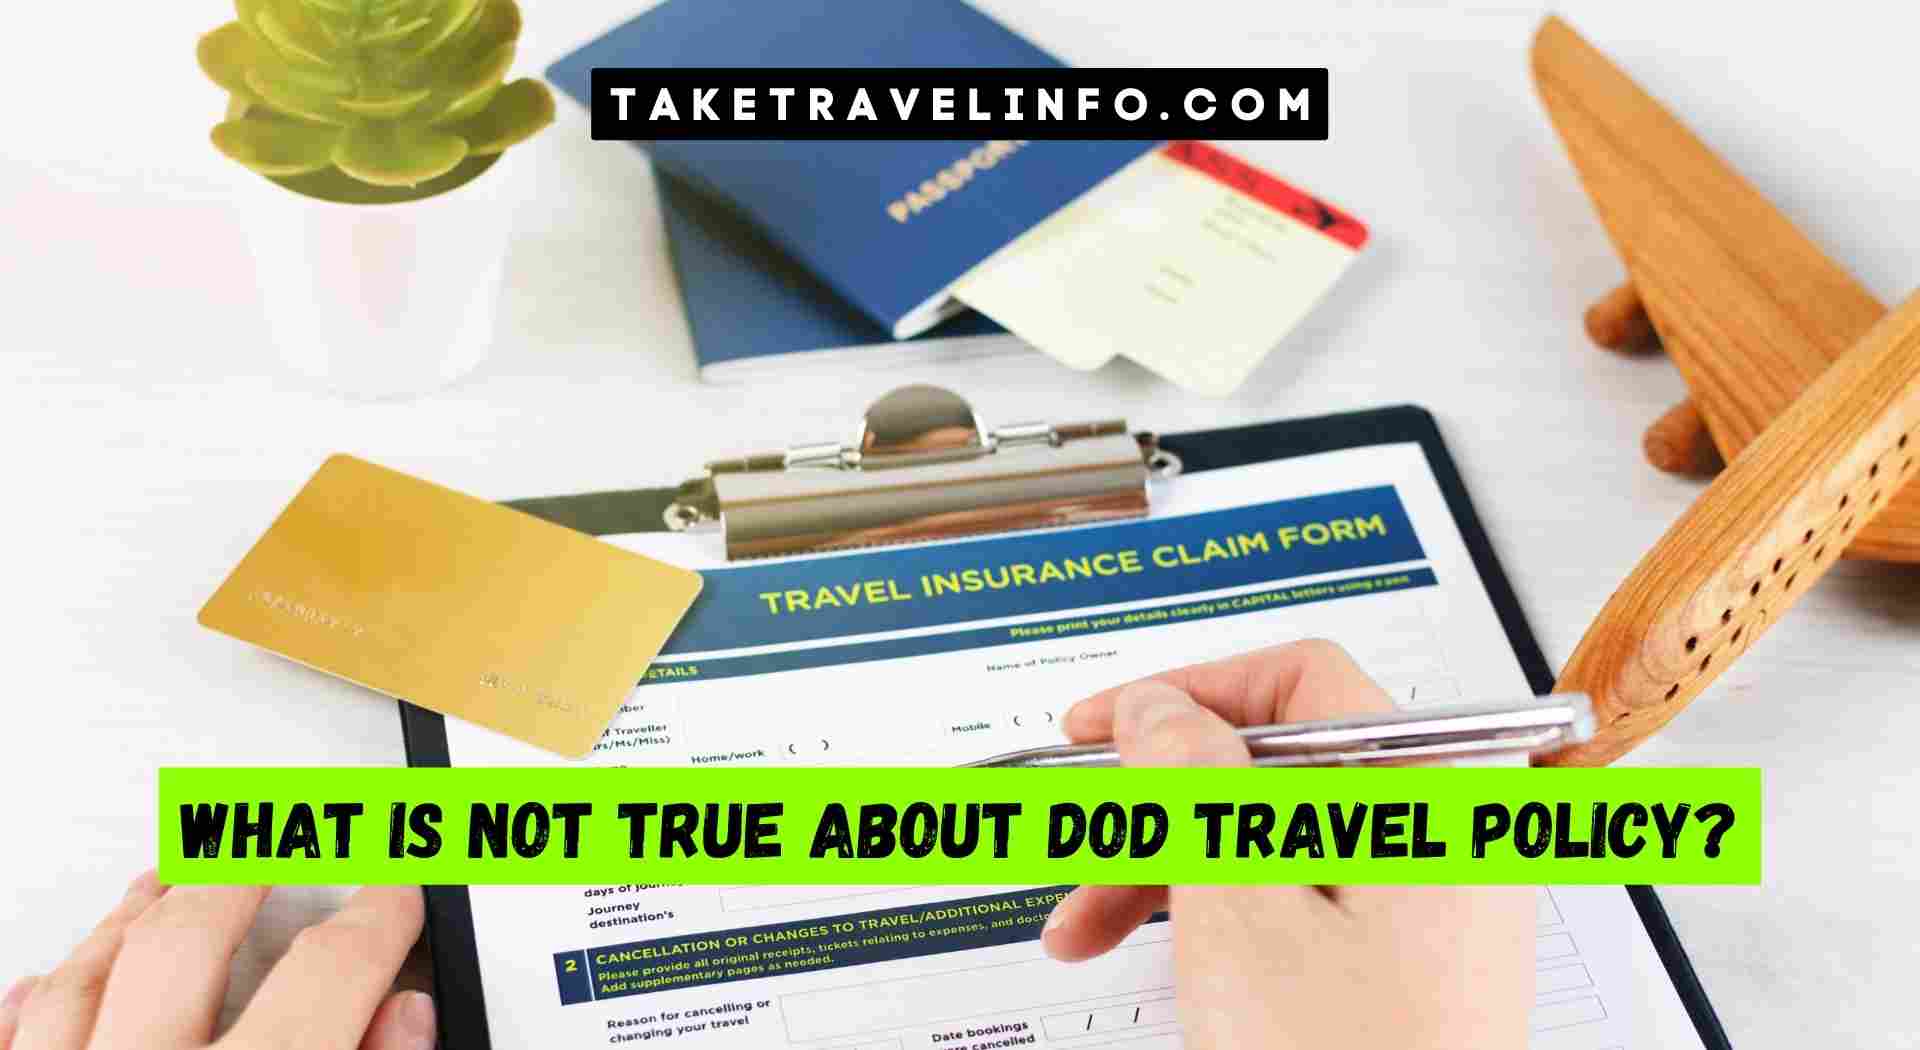 What is Not True About DOD Travel Policy?